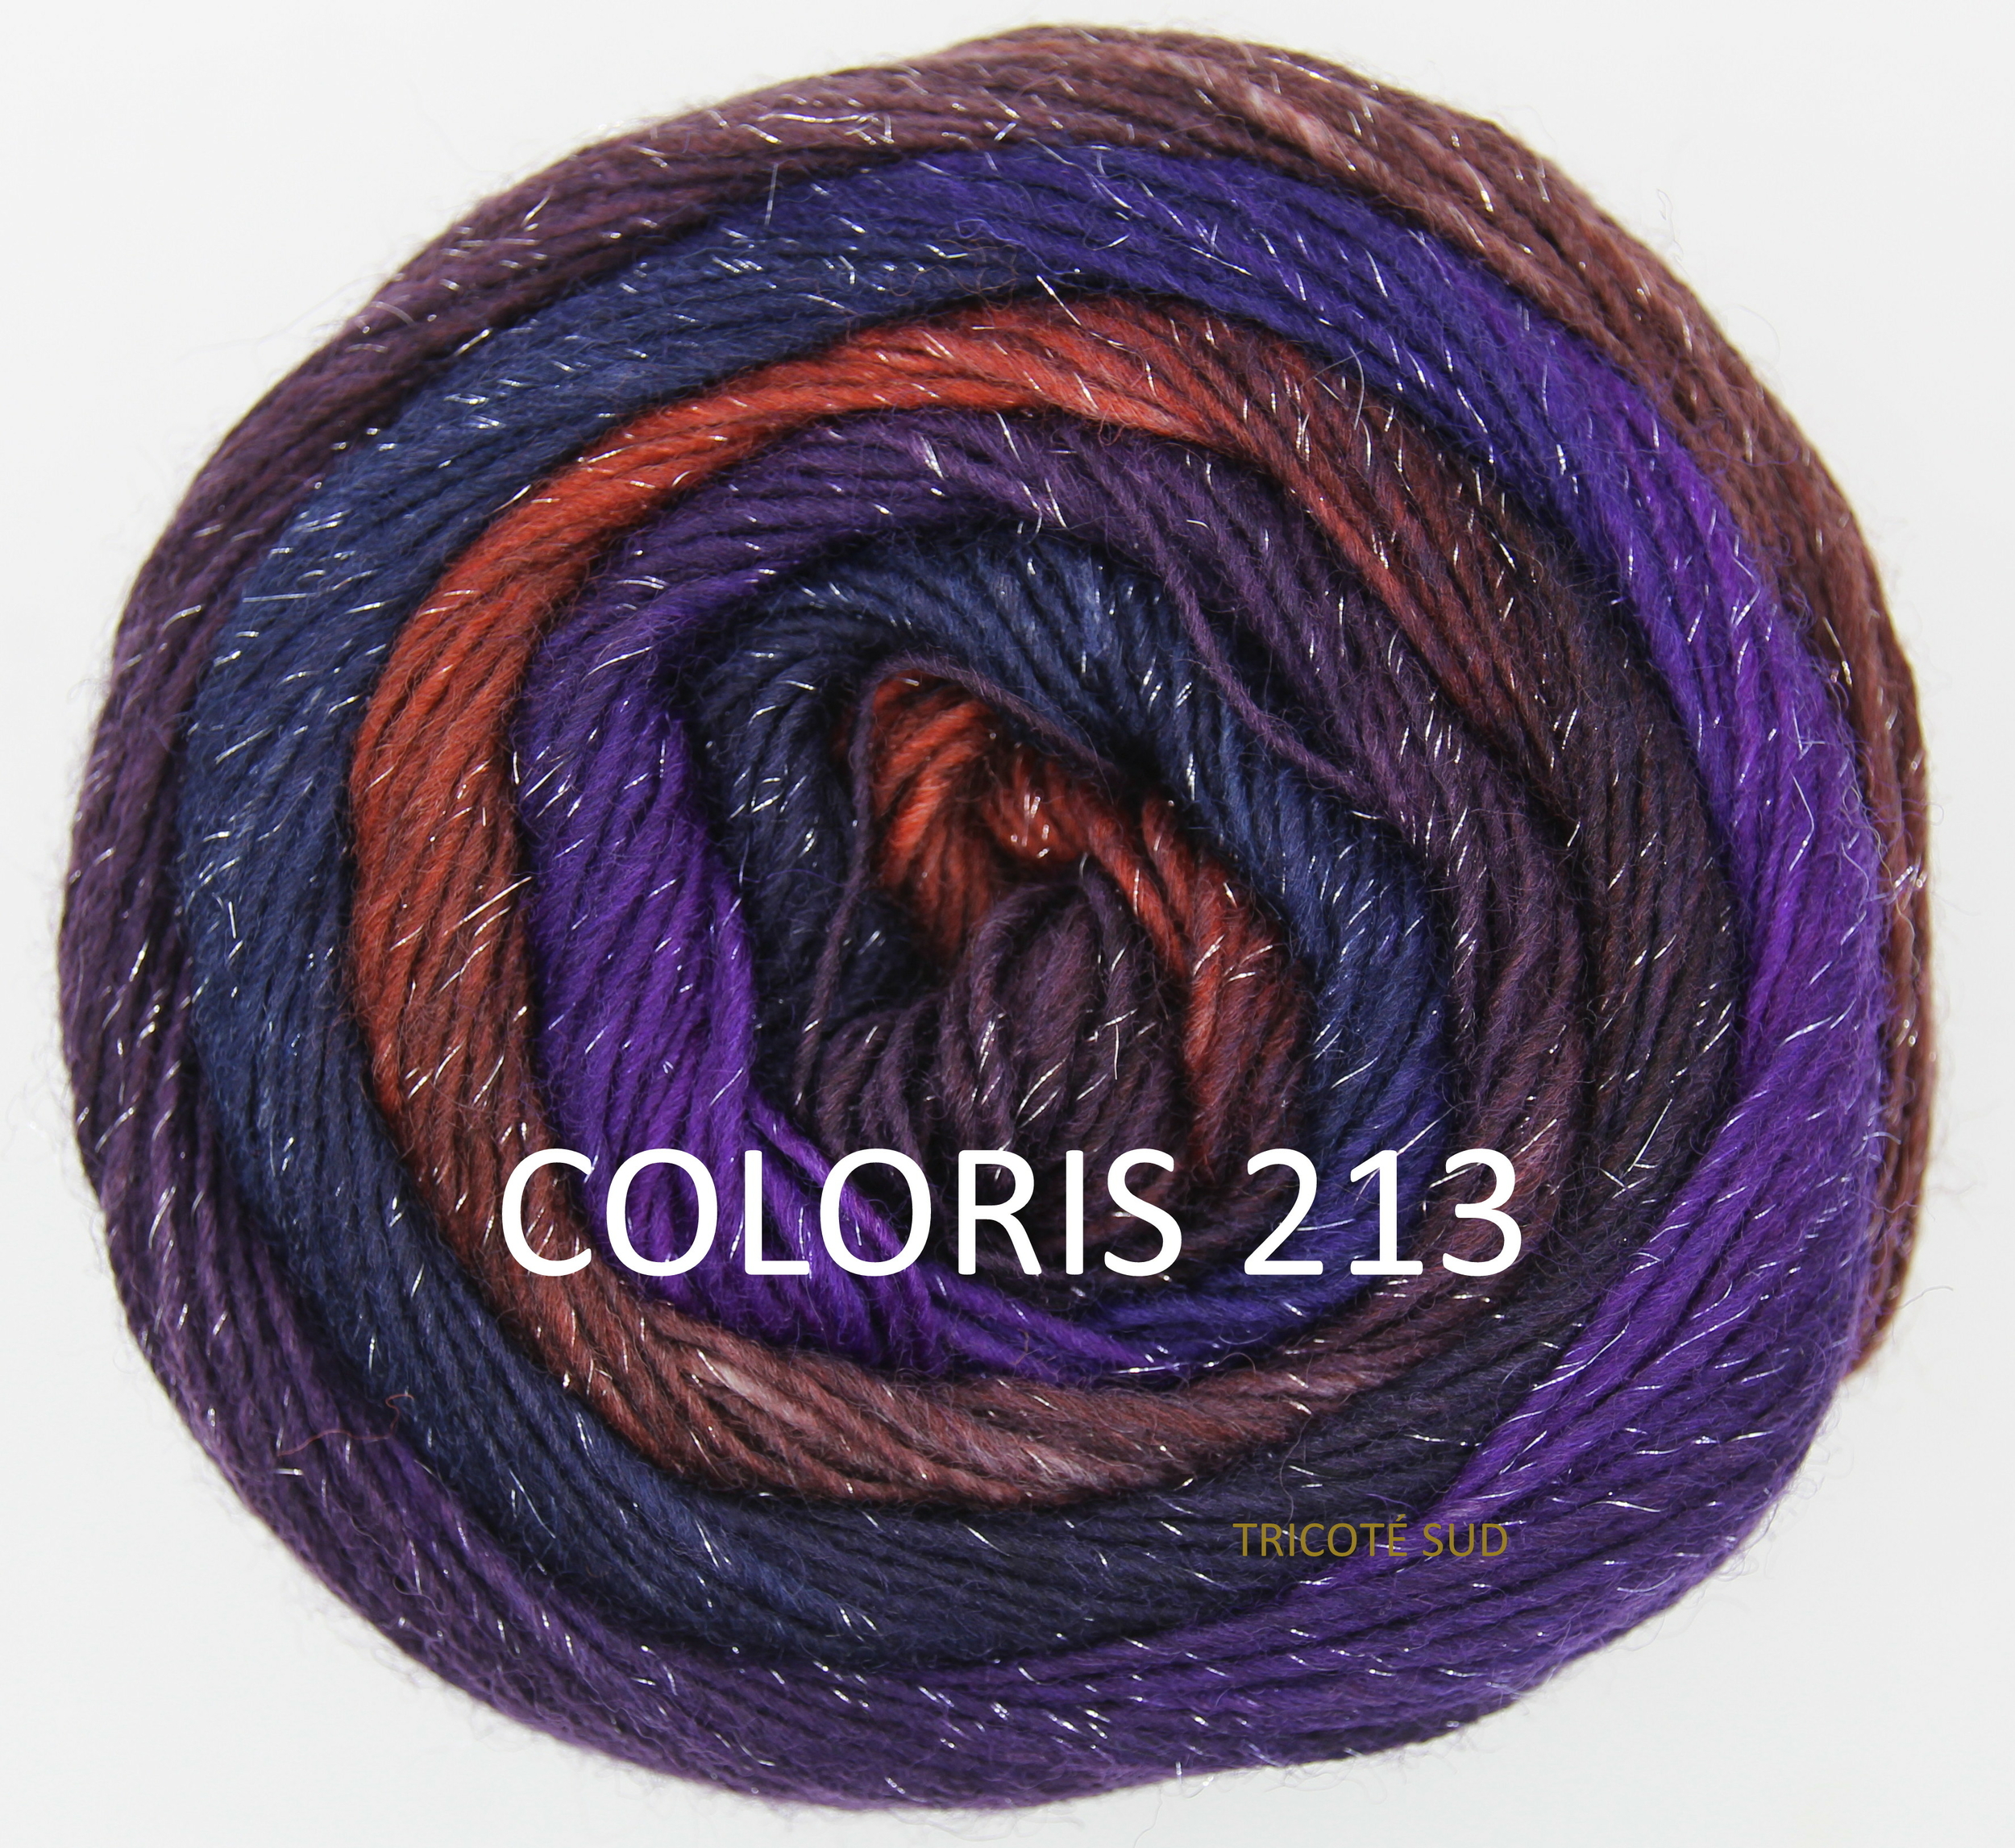 MILLE COLORI SOCKS AND LACE LUXE COLORIS 213 (1)